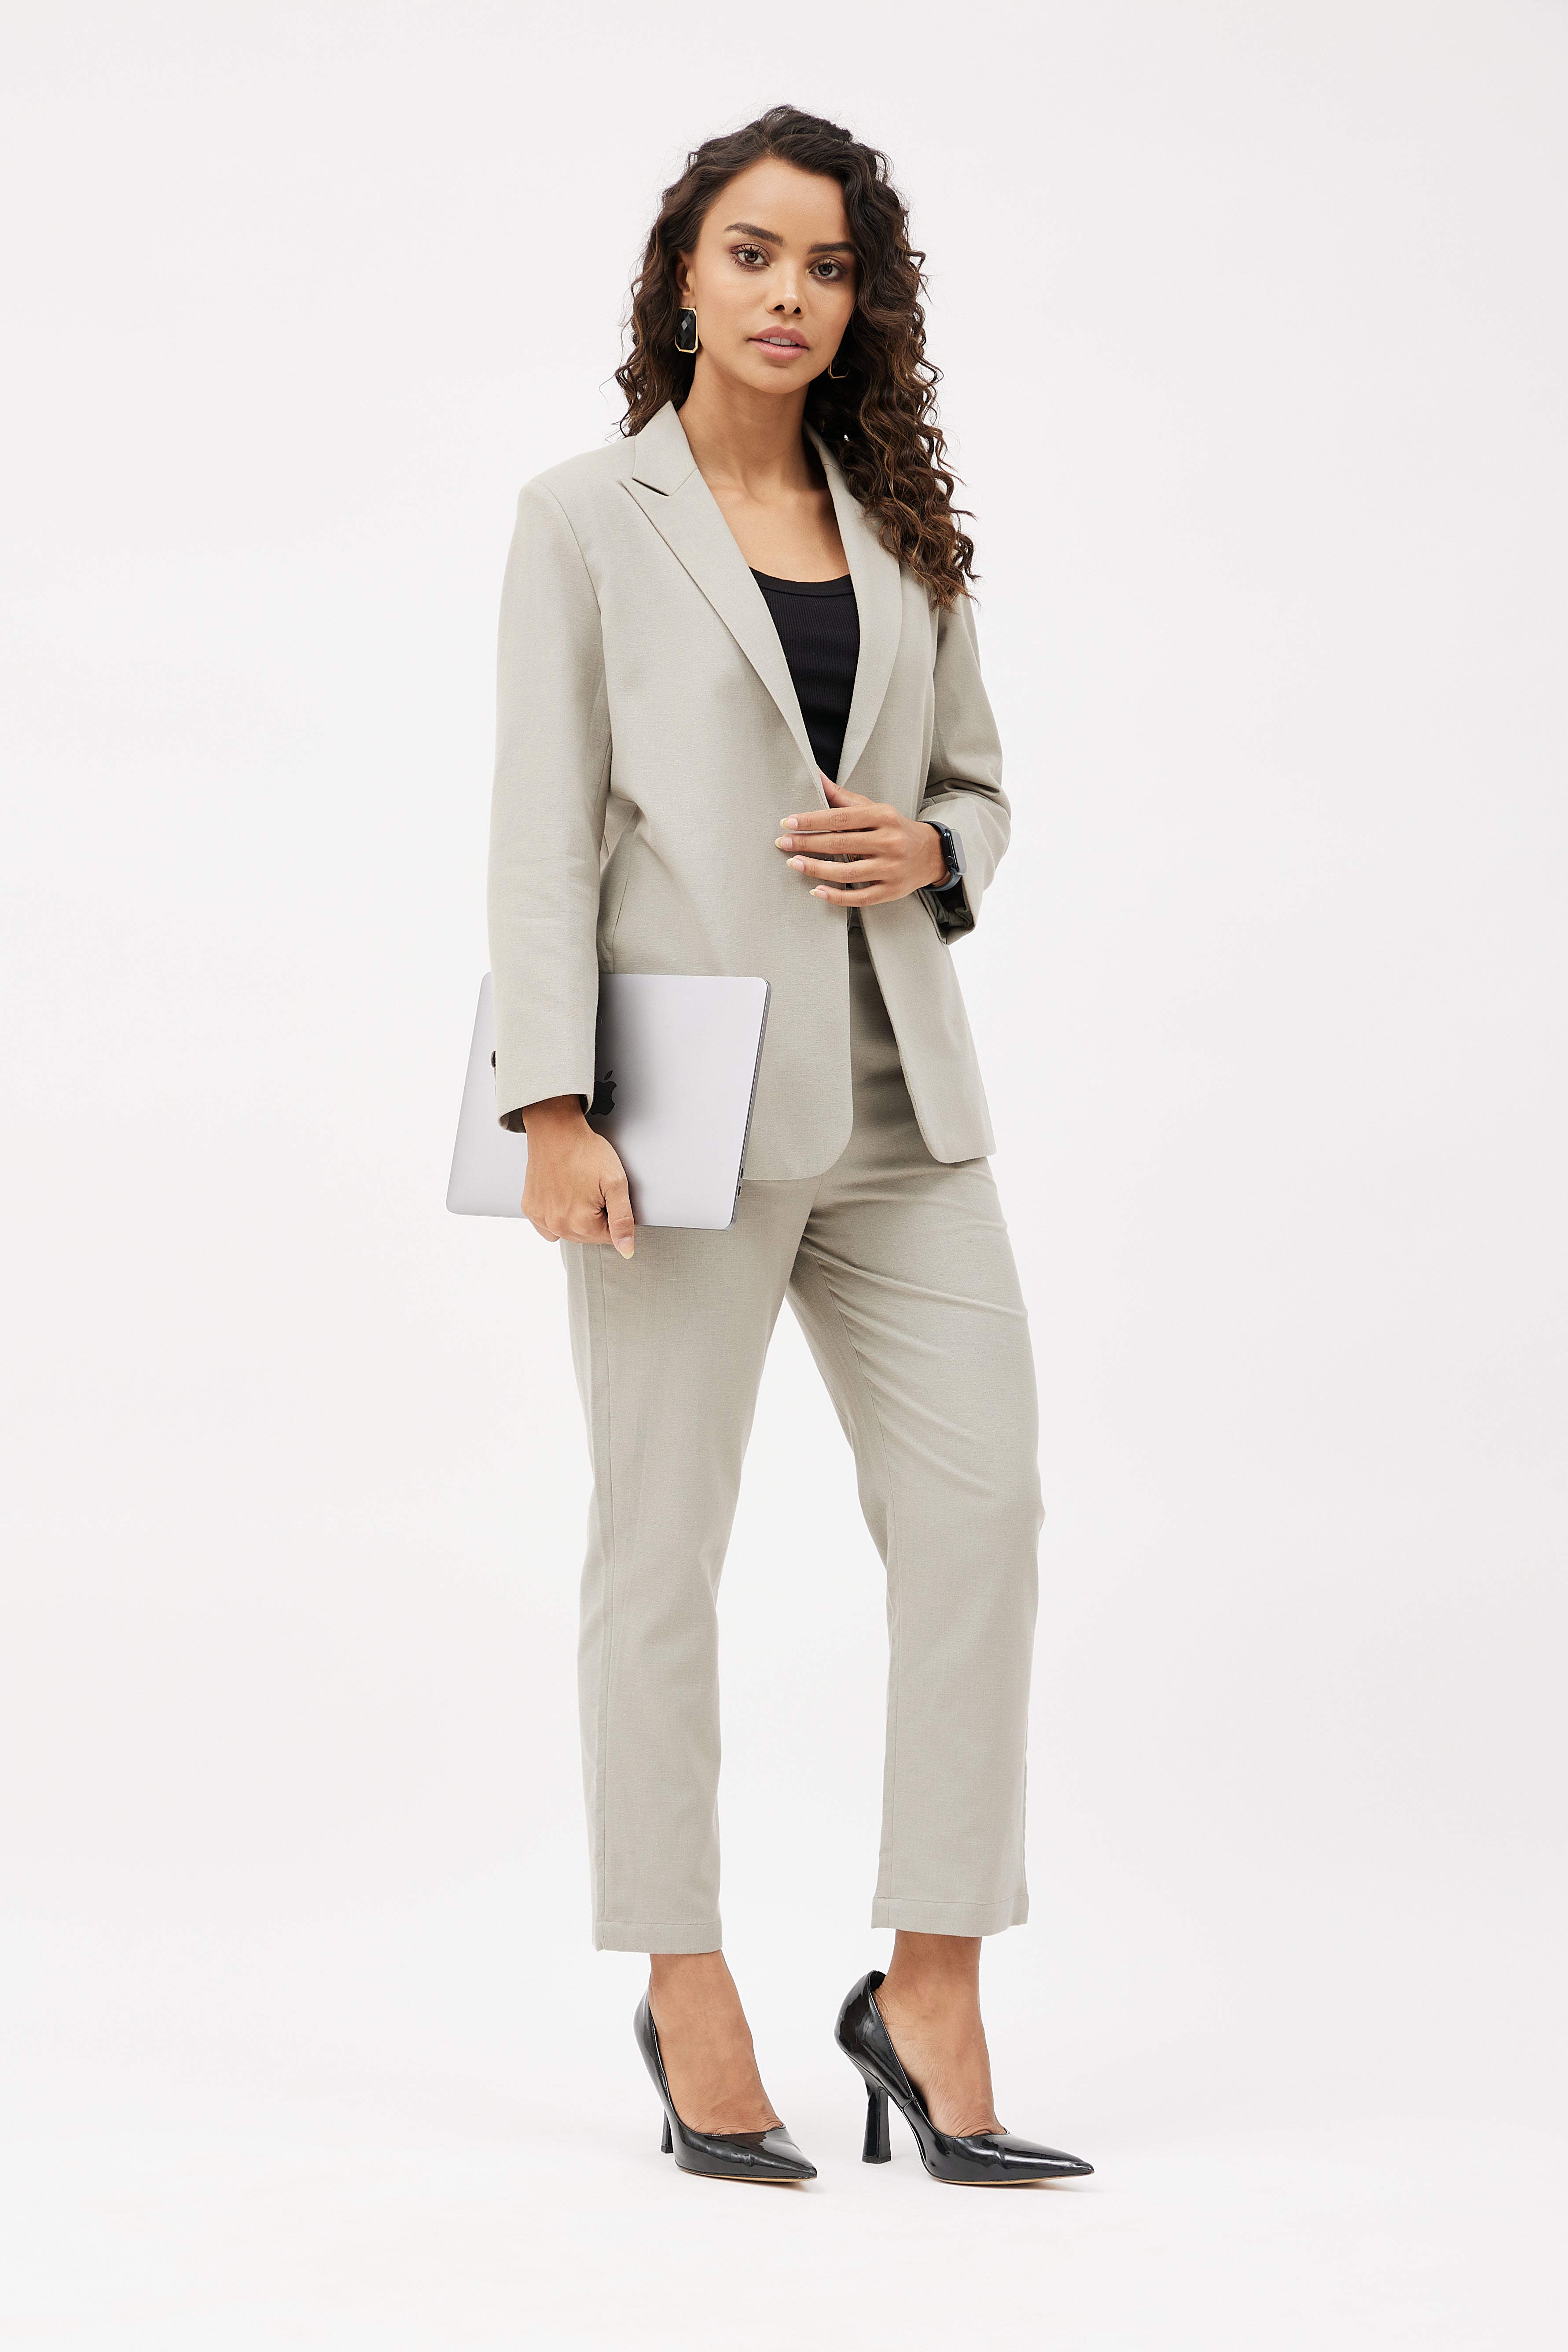 ZARA VANILLA STRAIGHT BLAZER WITH POCKETS AND MATCHING TROUSERS PANTS SET  SUIT L  eBay